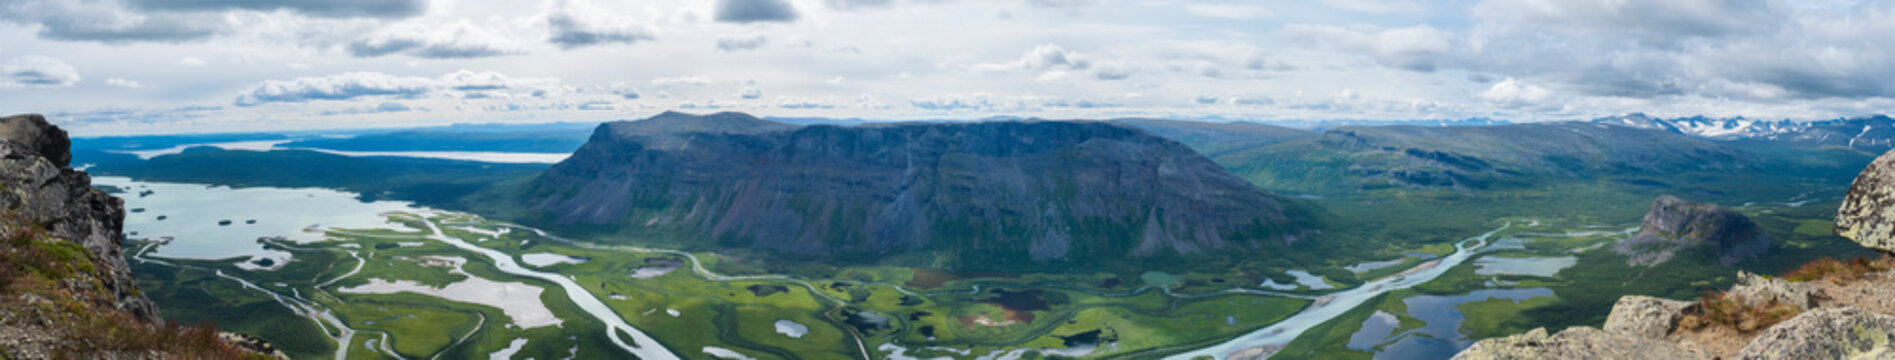 Aerial ultra wide panoramic scenic view from Skierffe rock summit, glacial Rapadalen river delta valley at Sarek national park with meanders, mountains, birch trees. Summer landscape Sweden Lapland